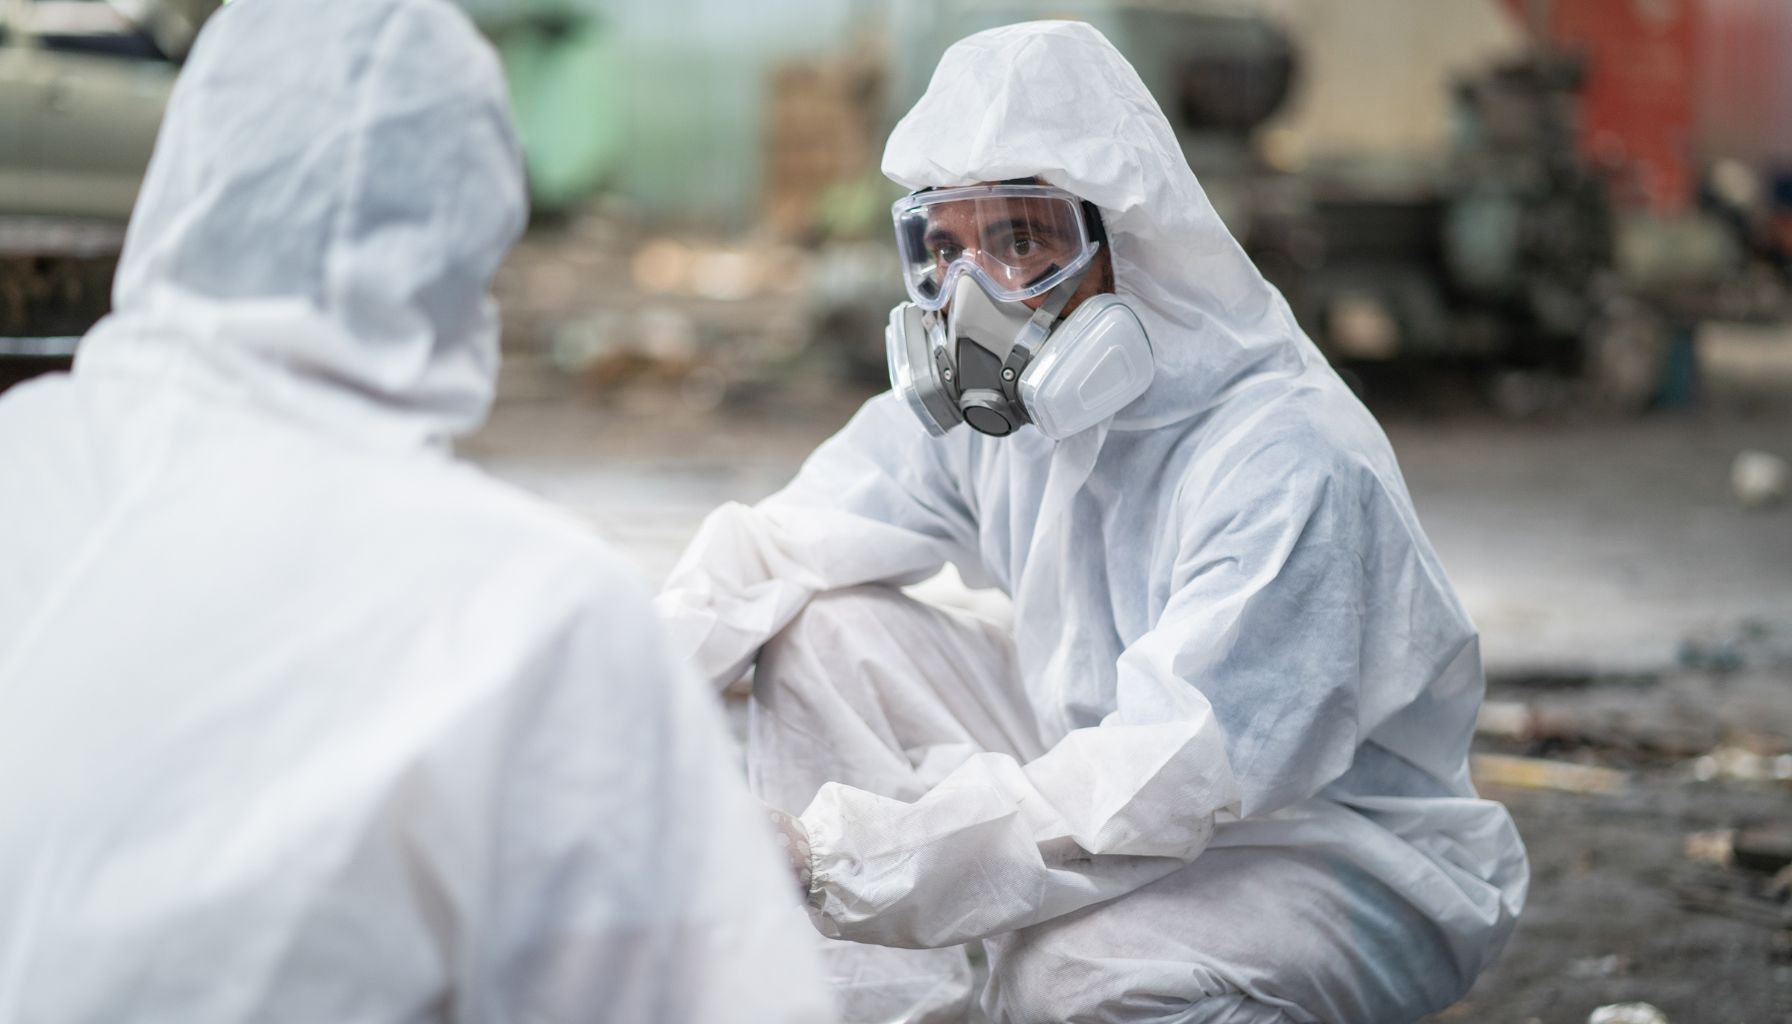 Two individuals in full hazmat suits and respiratory masks are engaged in conversation in an industrial setting, likely discussing water damage restoration. -PureOneServices